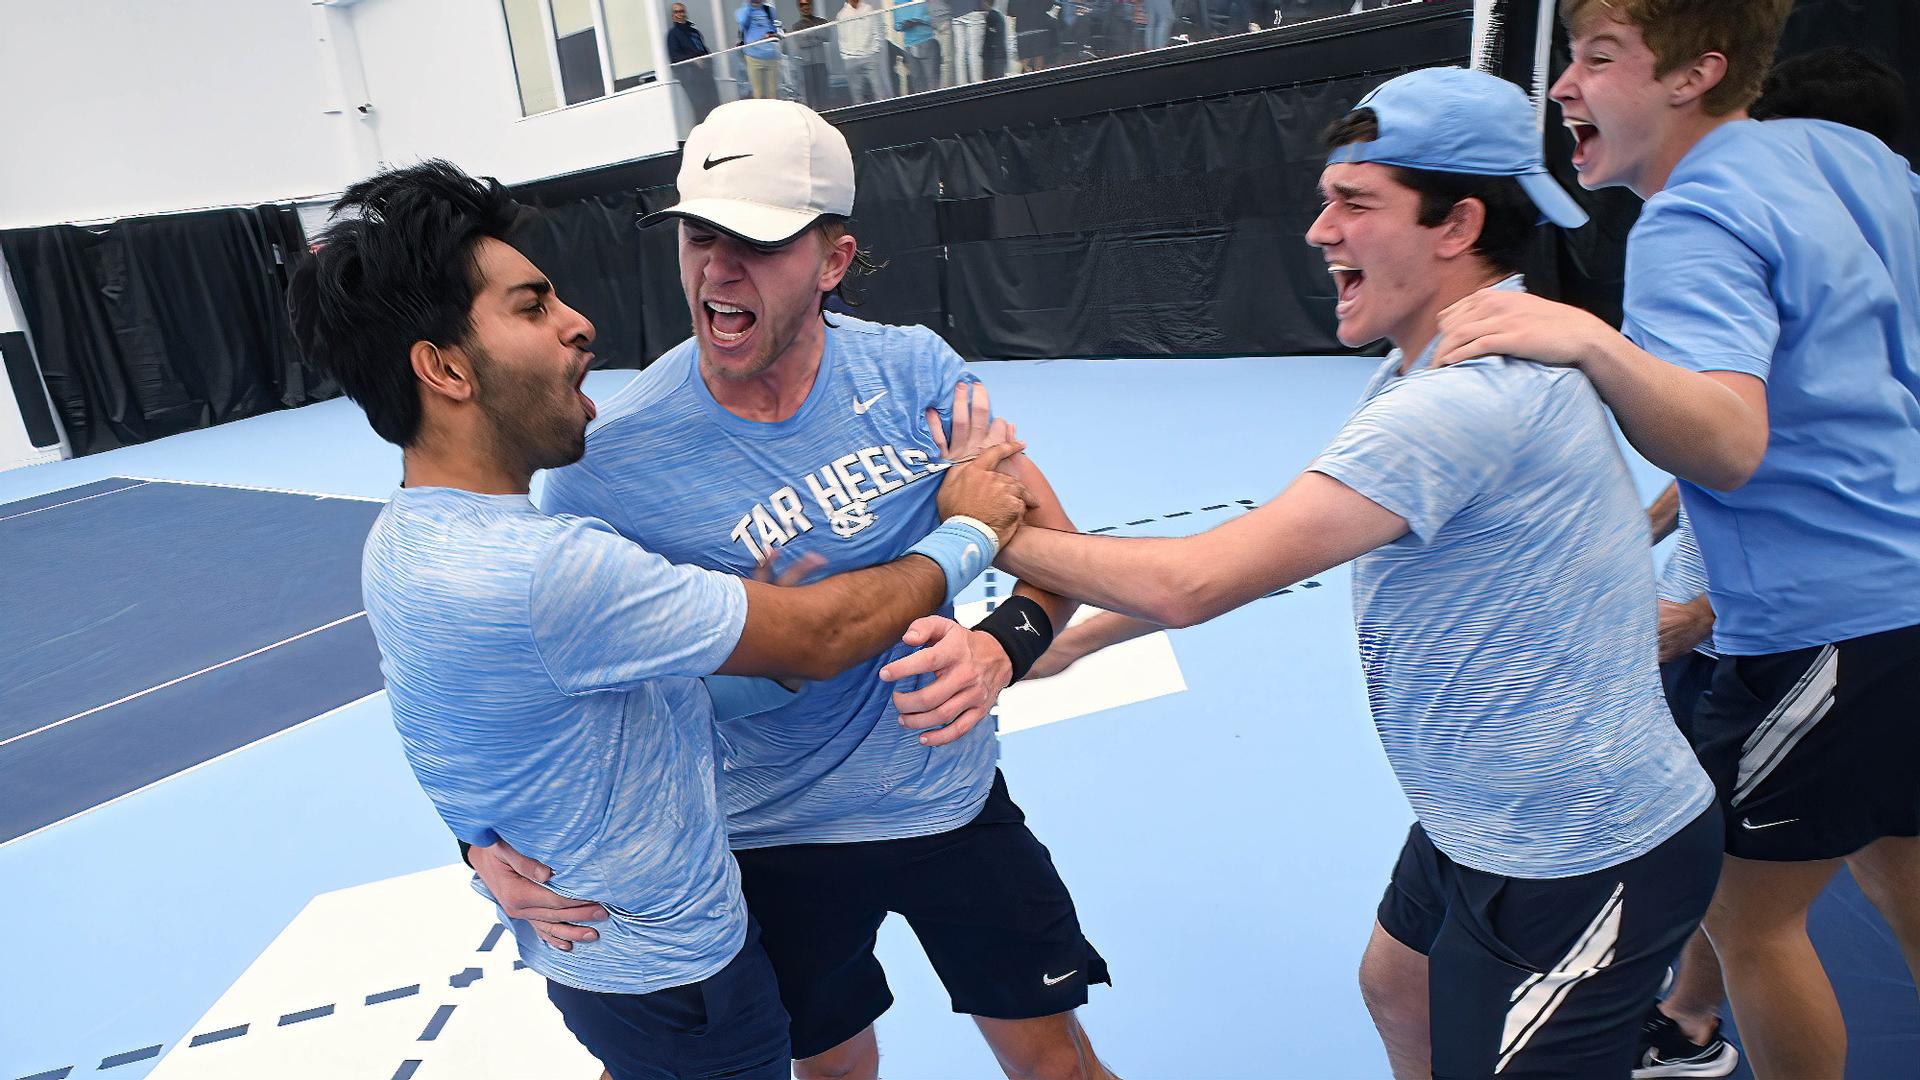 UNC Men’s and Women’s Tennis Teams Headed to ITA National Championships